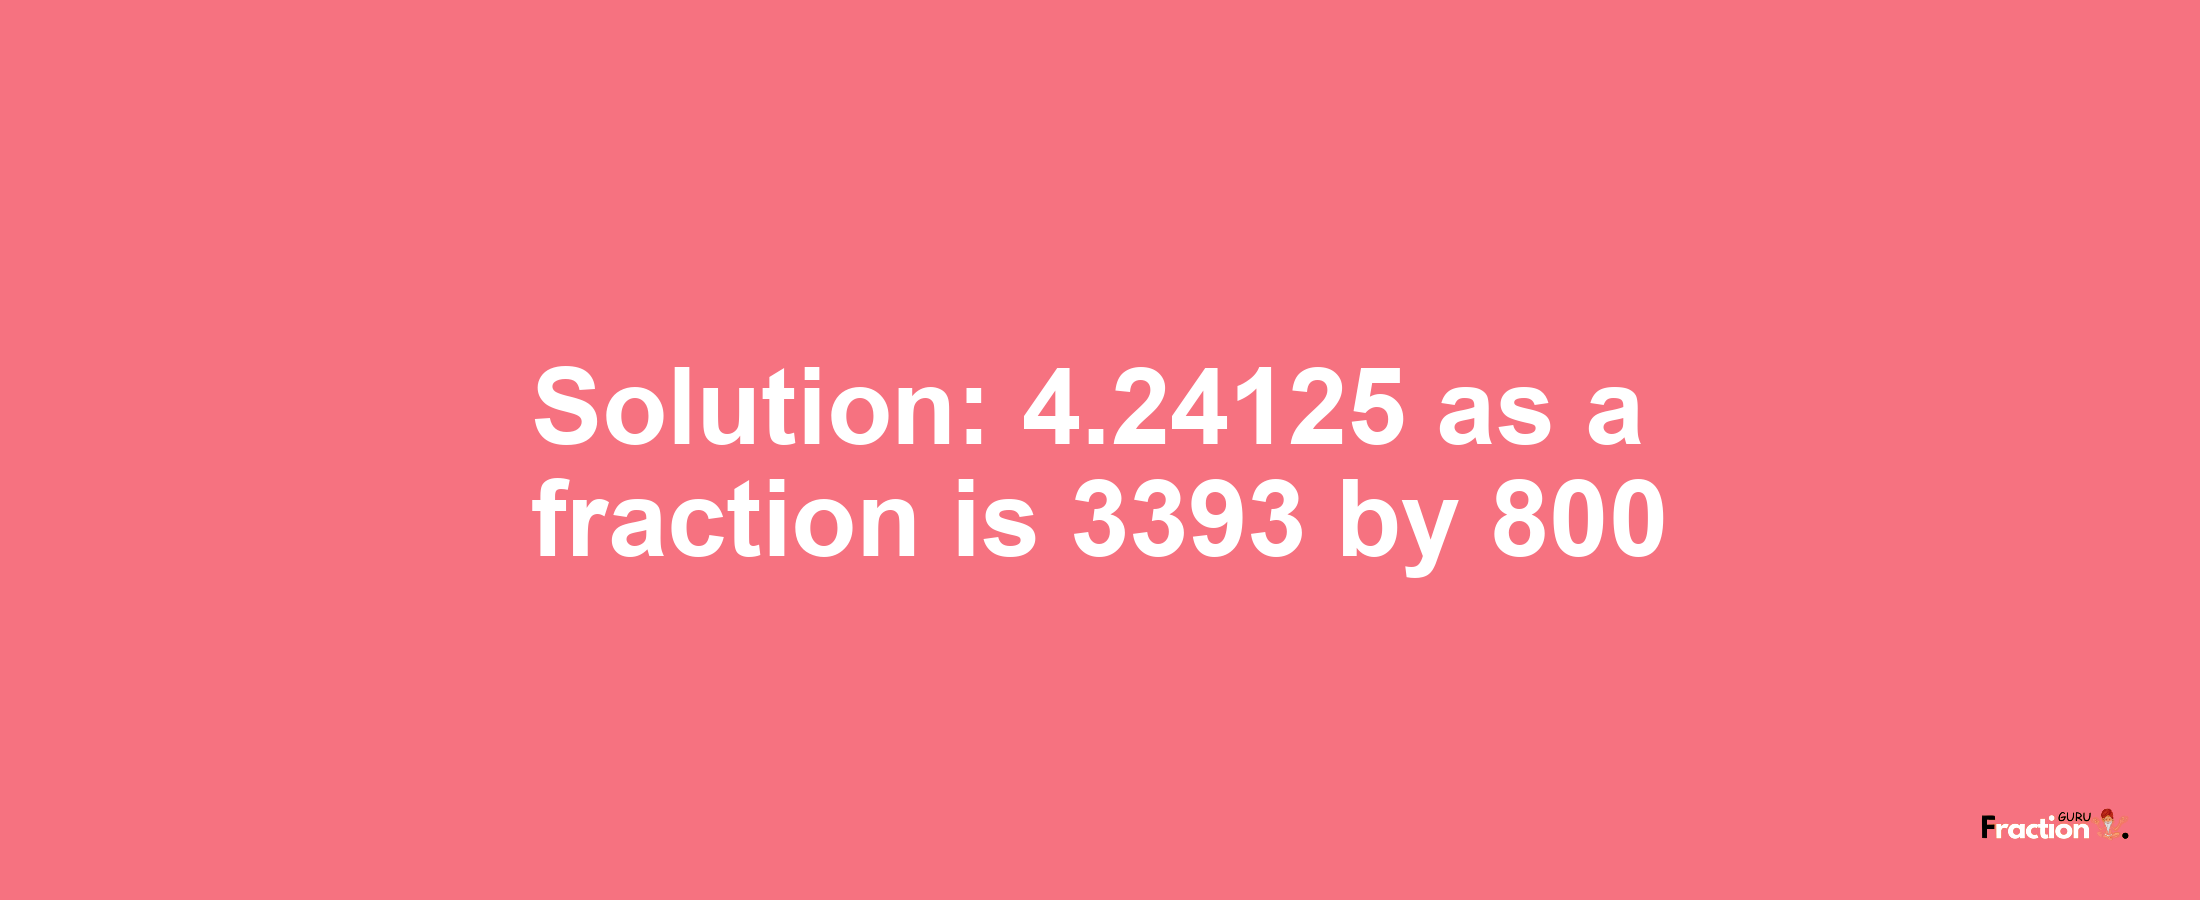 Solution:4.24125 as a fraction is 3393/800